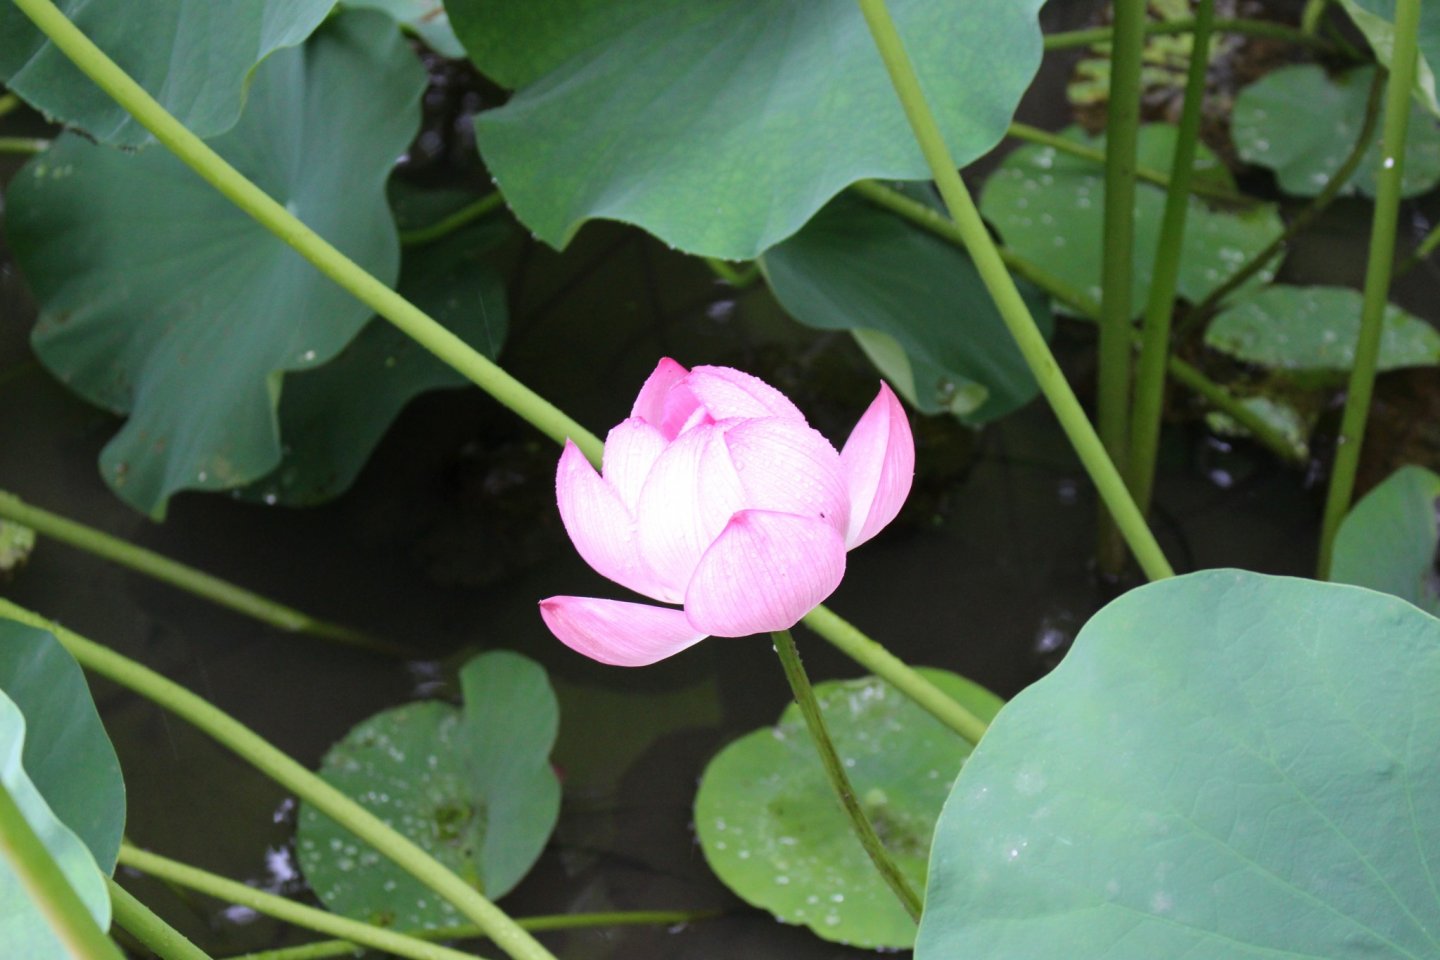 The lighter parts of this lotus flower make it appear to glow in the gray light cast by the day's cloudy and rainy weather